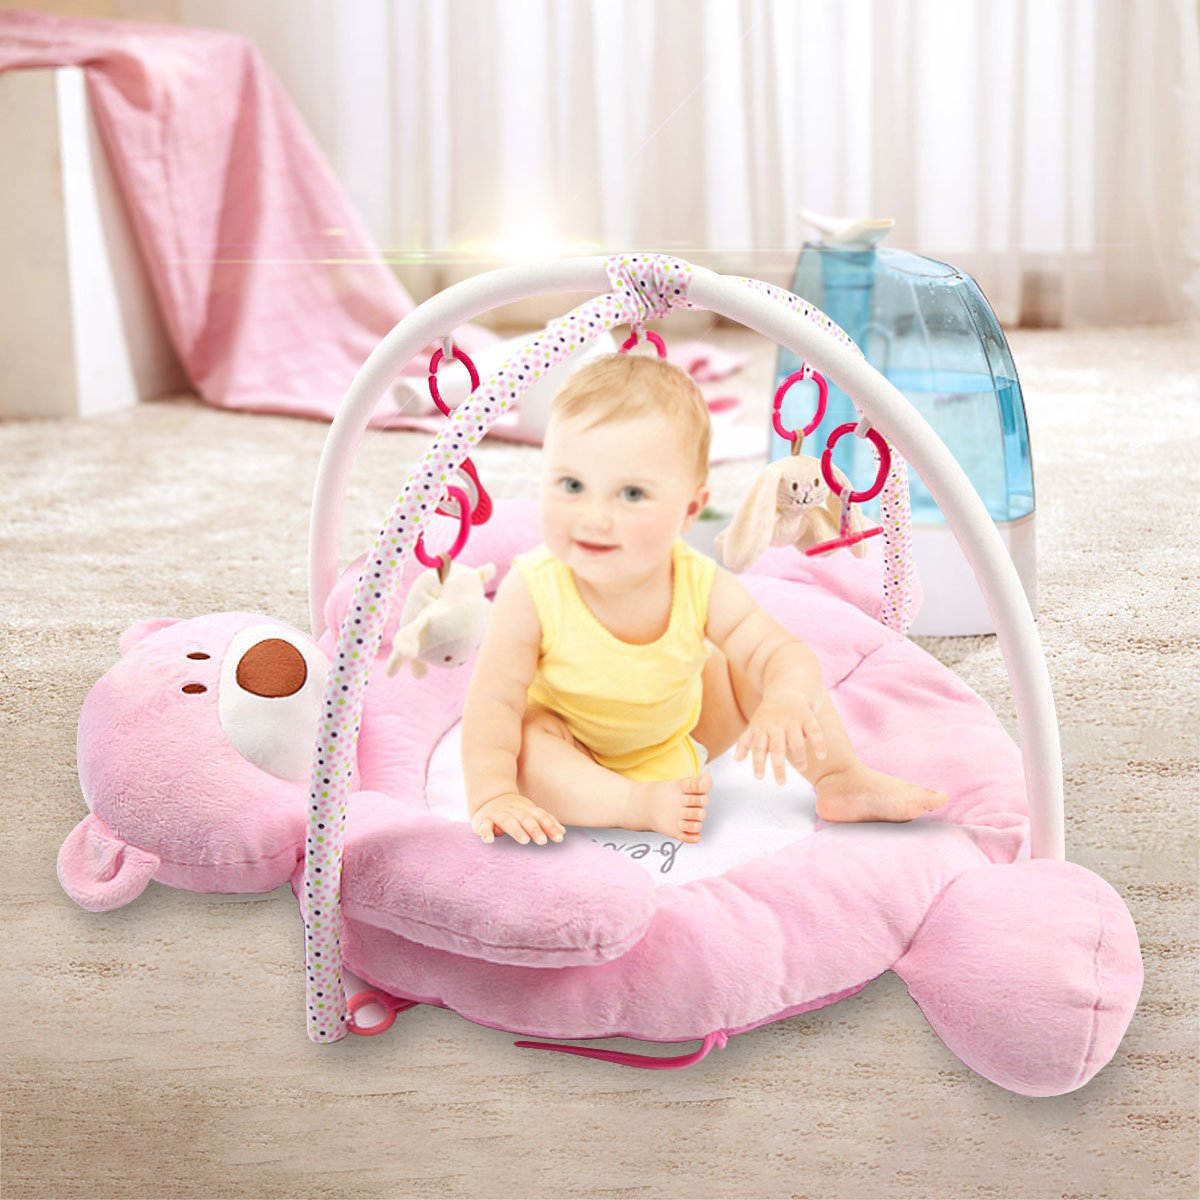 Foldable Musical Baby Bear Playmat Children Soft Gym Activity Floor Mat Toddlers Baby Play Bat